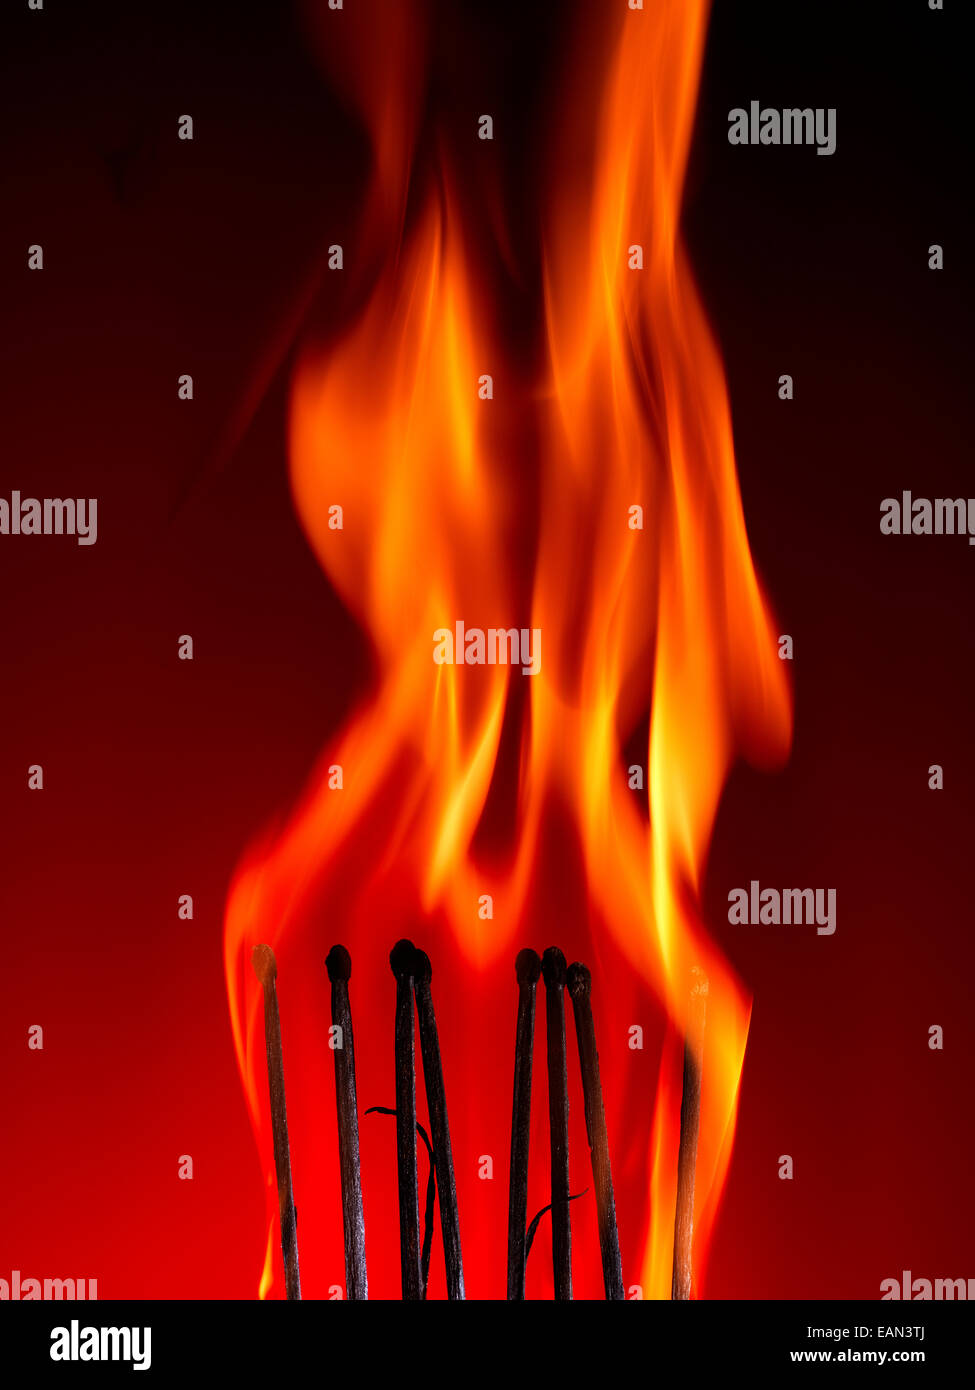 Macro shot of a flaming matchstick on a red background Stock Photo